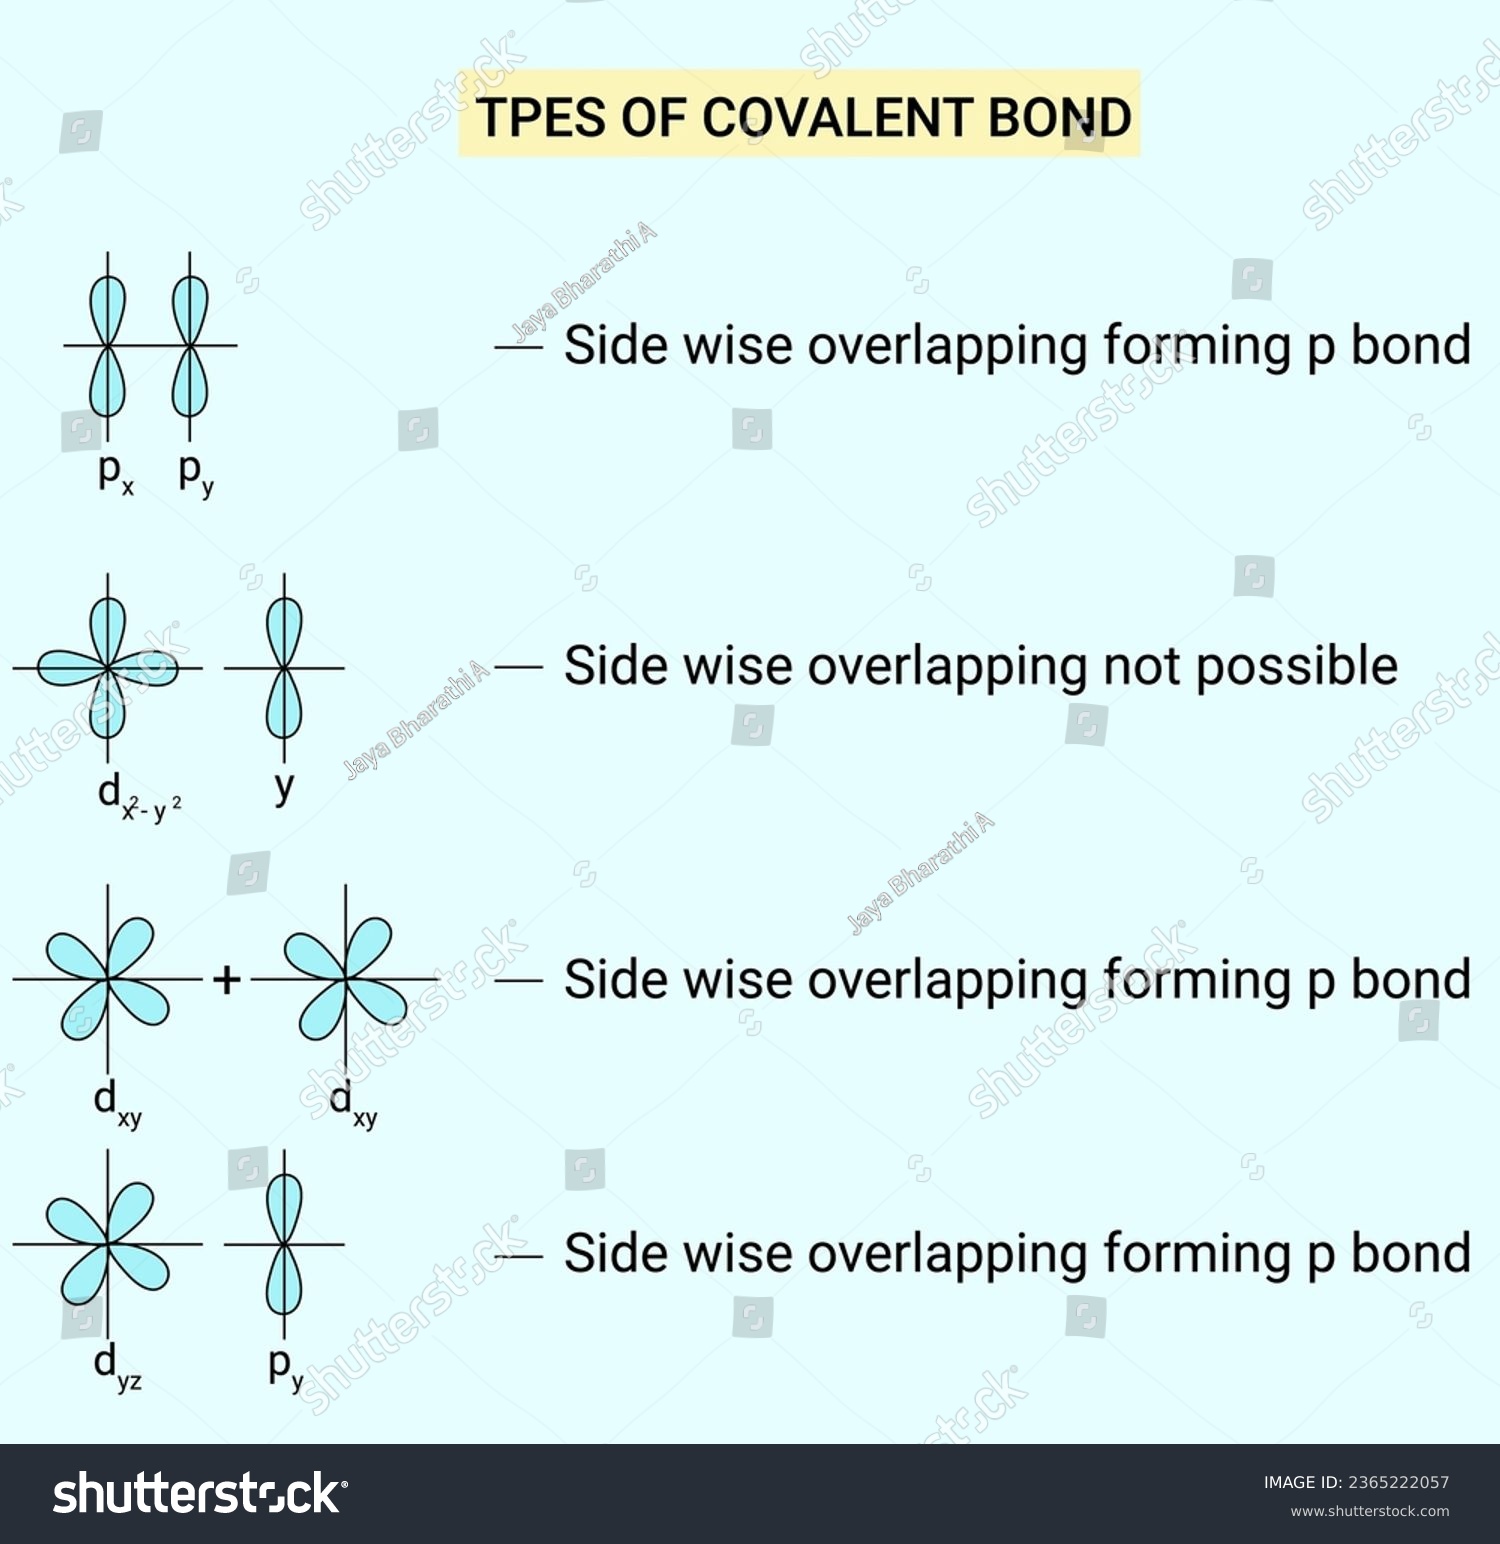 Types Of The Covalent Bond Royalty Free Stock Vector 2365222057 